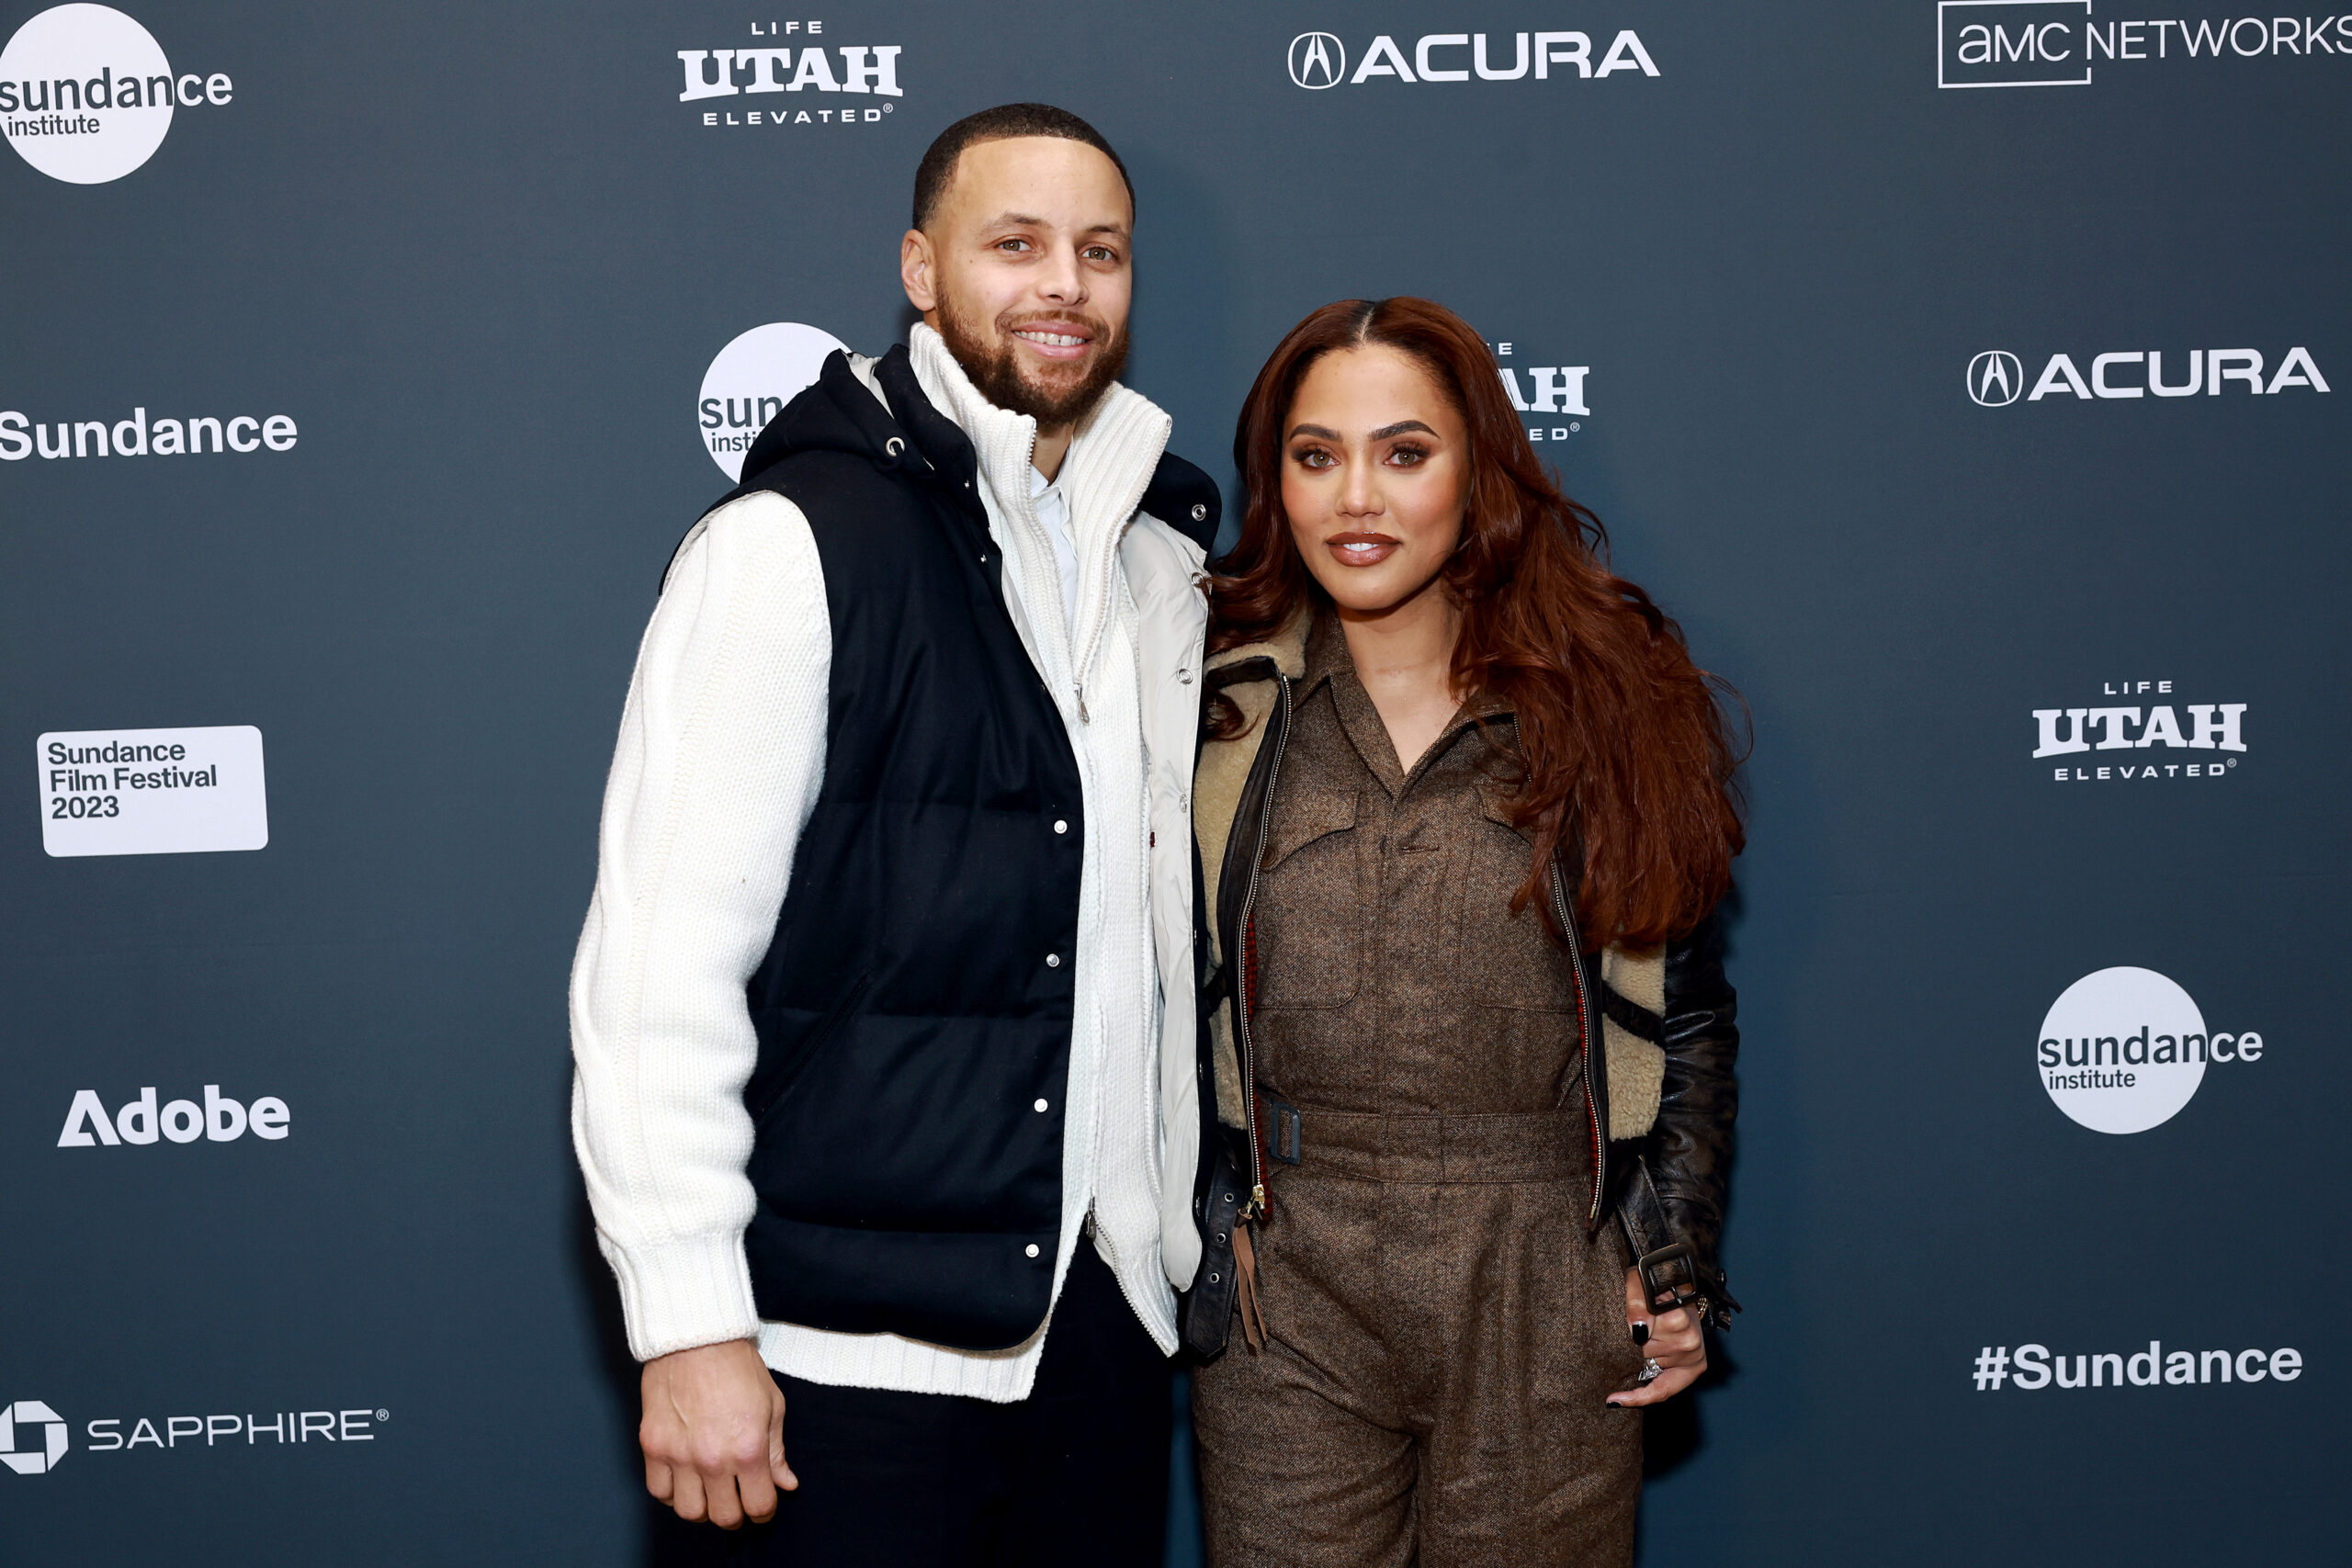 Who Is Stephen Curry’s Wife? Everything To Know About Ayesha Curry